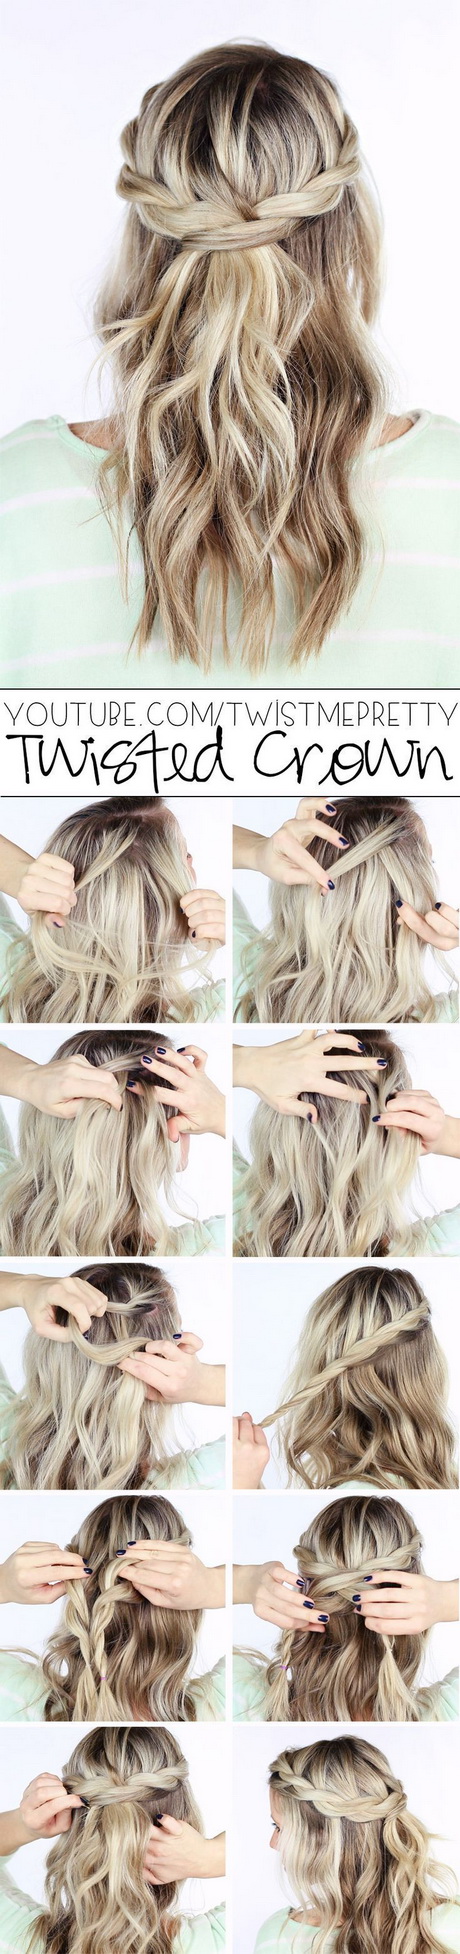 hairstyles-you-can-do-in-10-minutes-20_10 Hairstyles you can do in 10 minutes